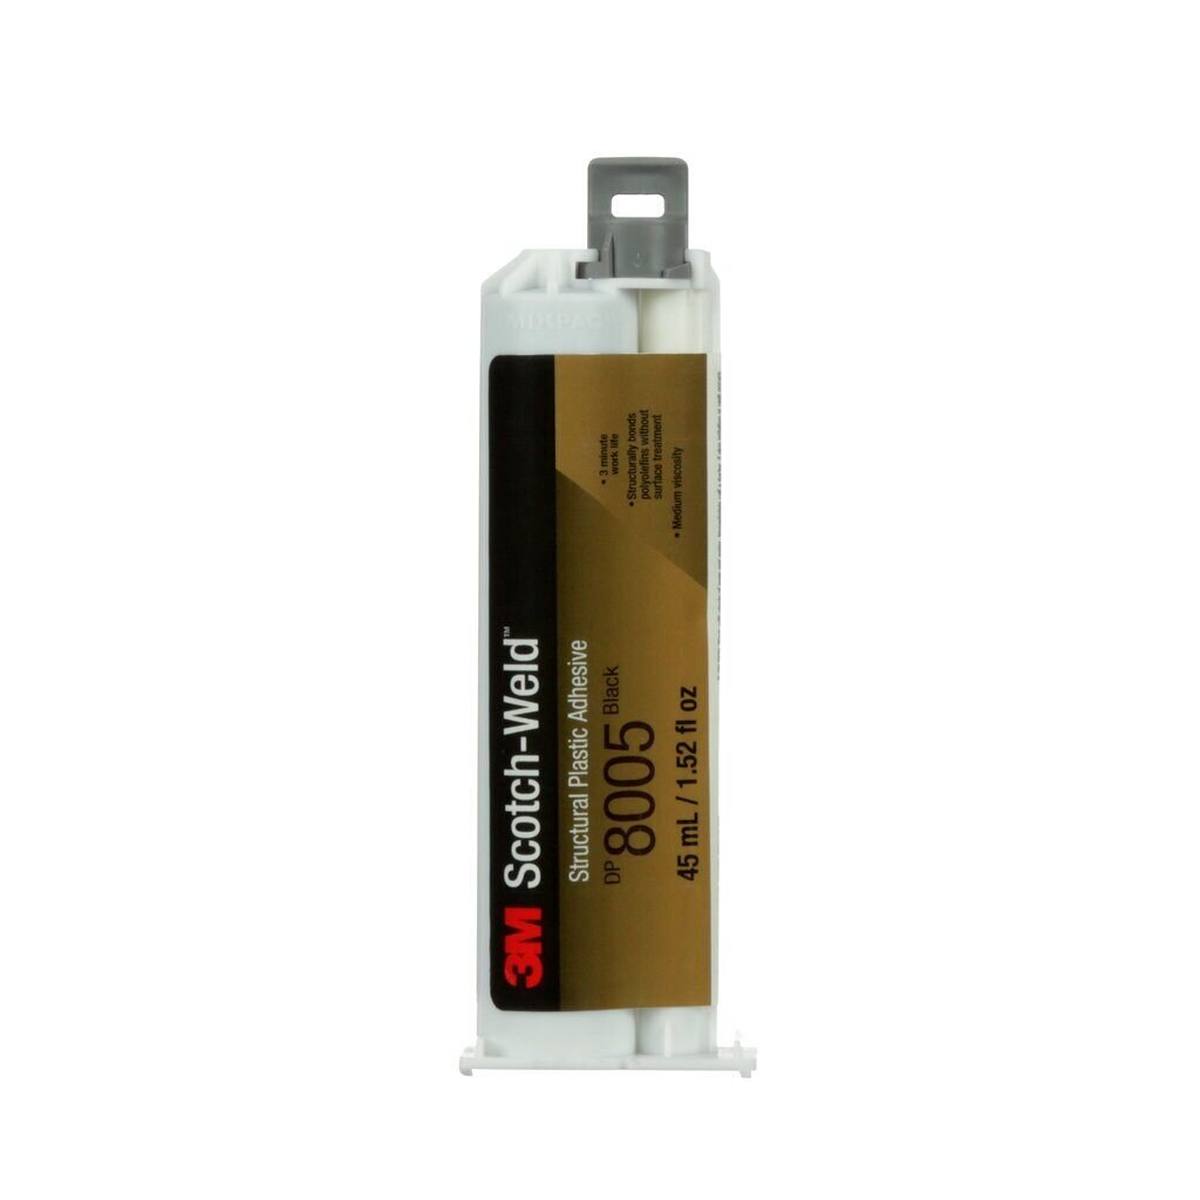 3M Scotch-Weld 2-component acrylic-based construction adhesive for the EPX System DP 8005, black, 45 ml